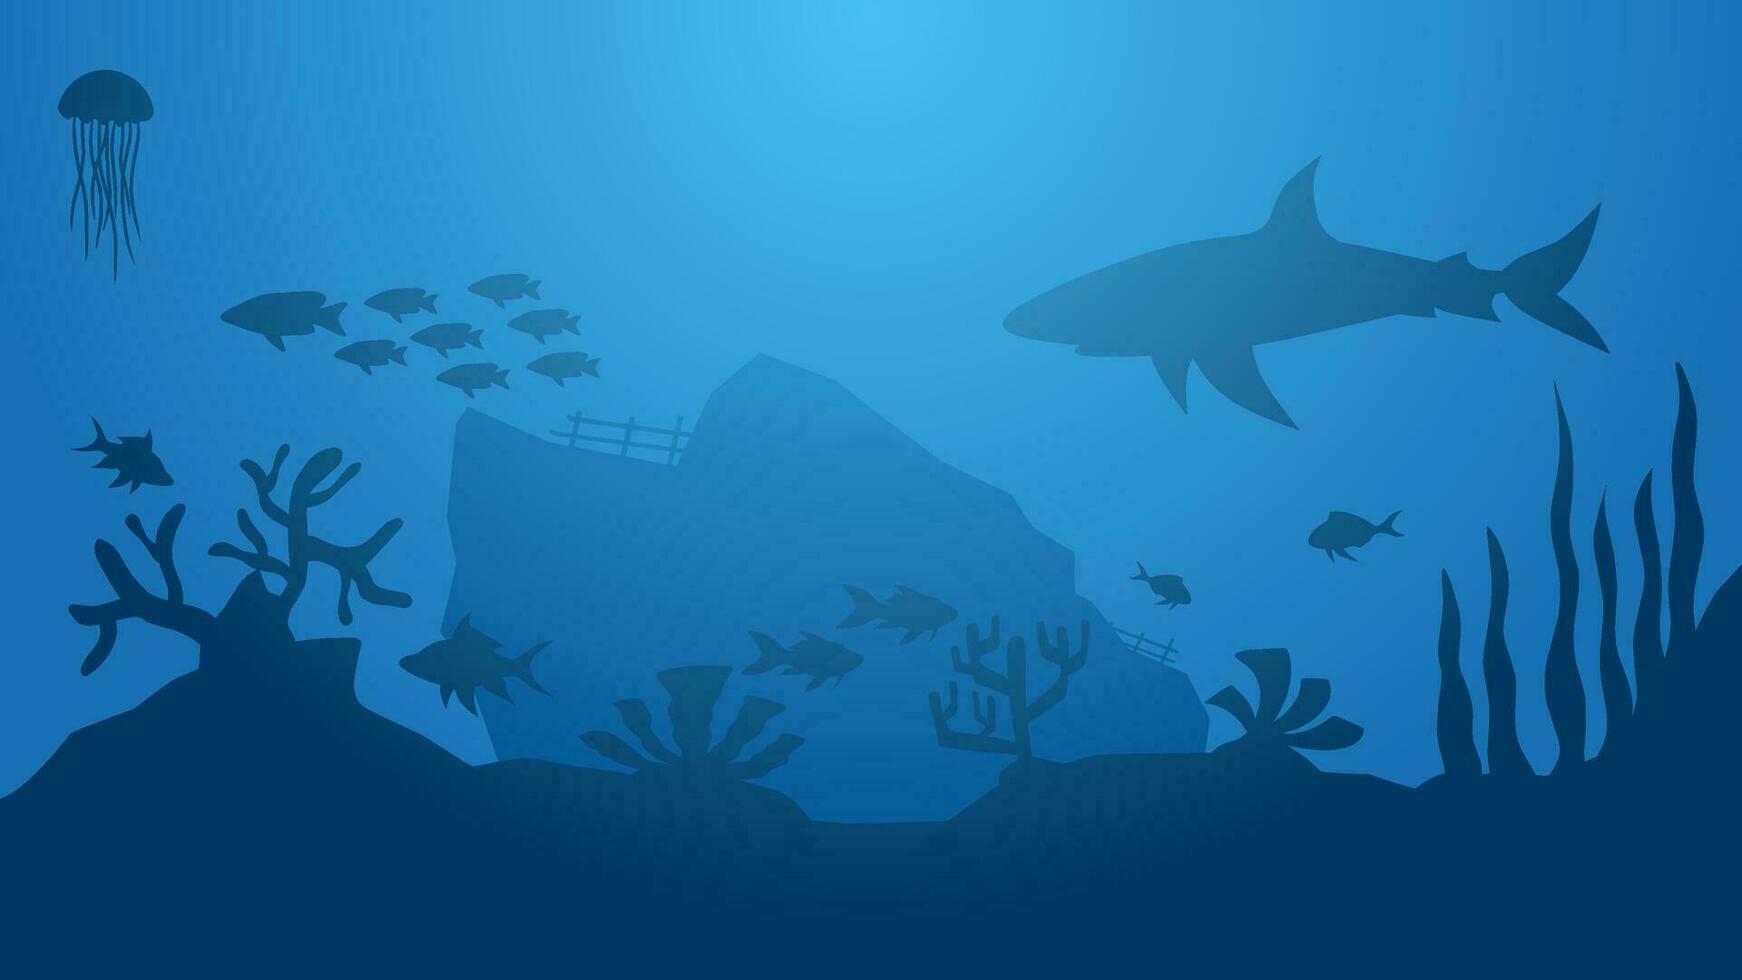 Seascape vector illustration. Scenery of shipwreck in the bottom sea with fish and coral reef. Sea world landscape for illustration, background or wallpaper